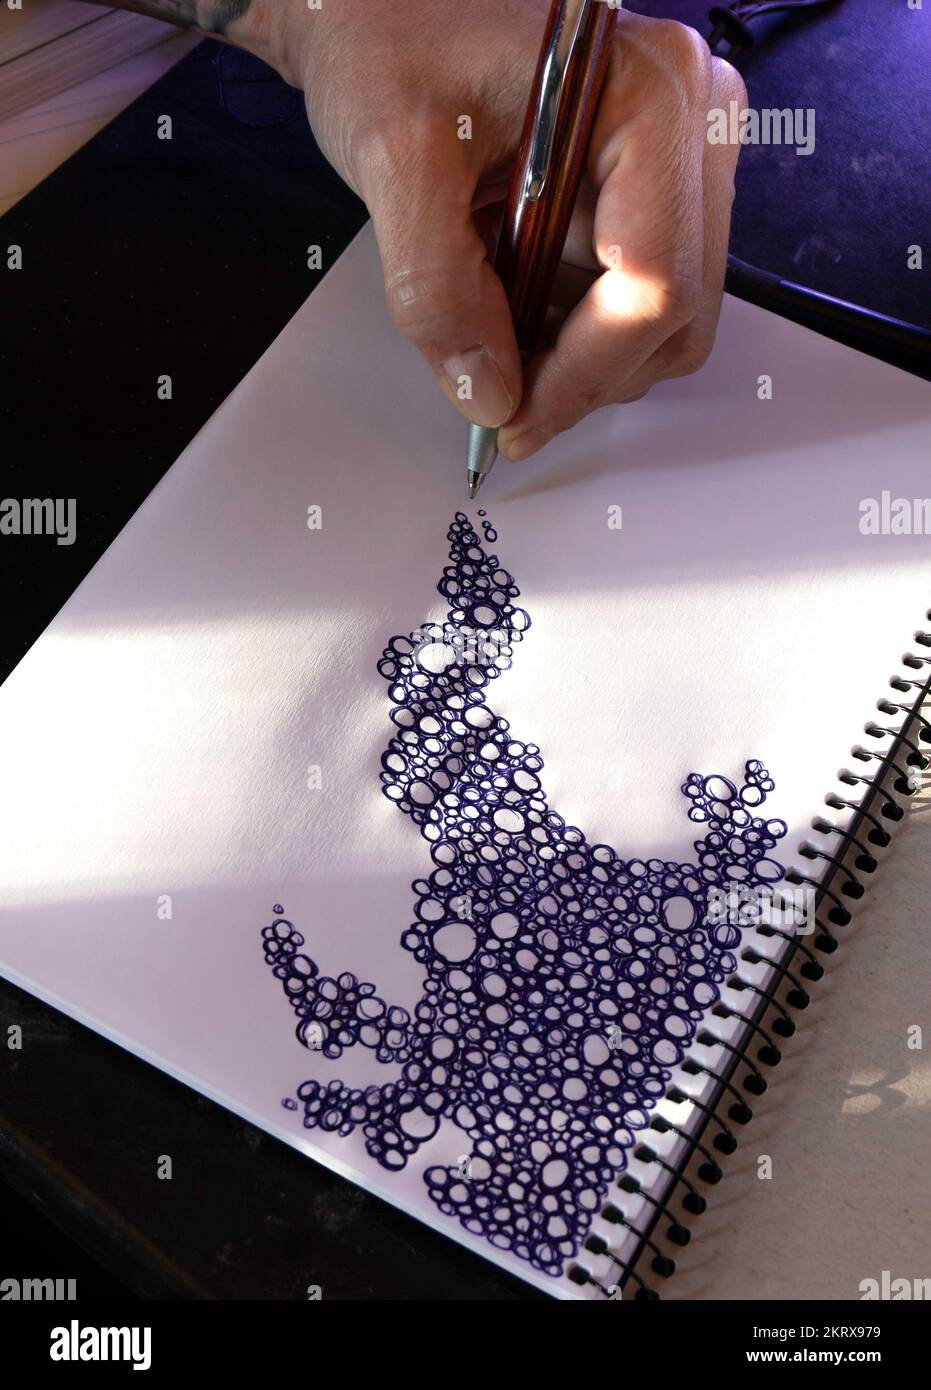 Close up of a hand drawing a pattern of scribbled bubbles on a blank scrapbook. Boredom, creativity concept Stock Photo